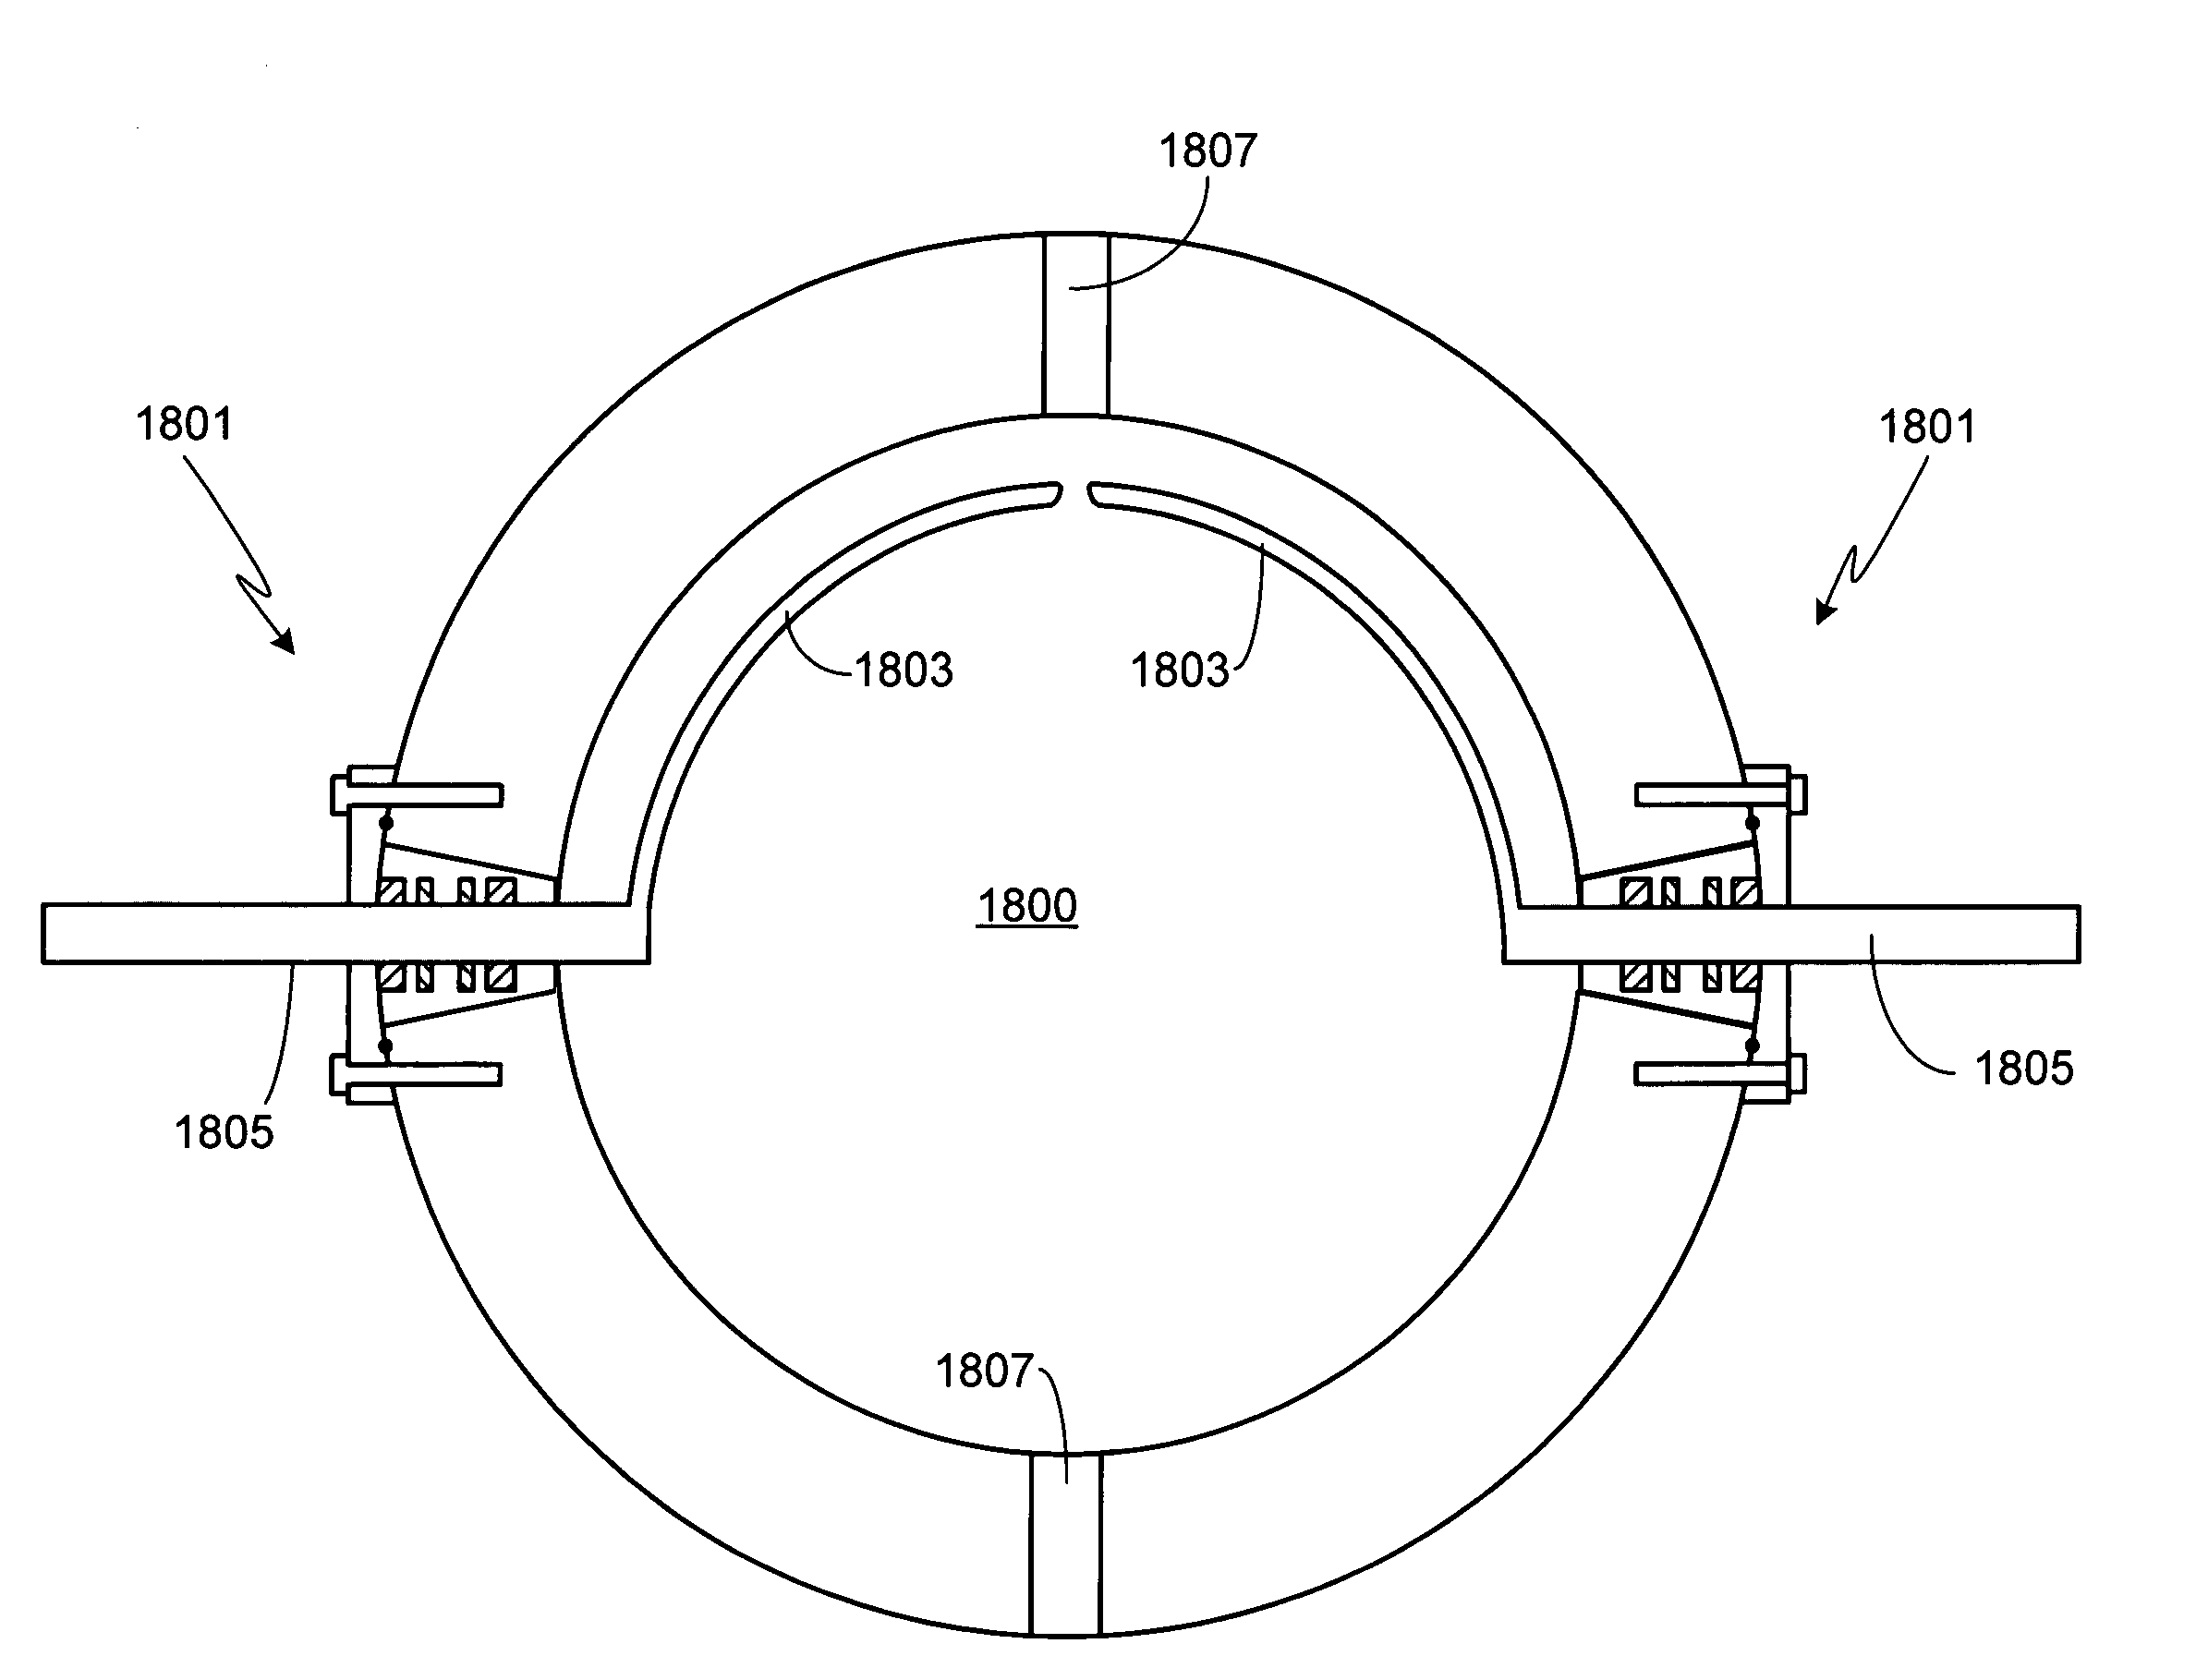 Fluid rotation system for a cavitation chamber